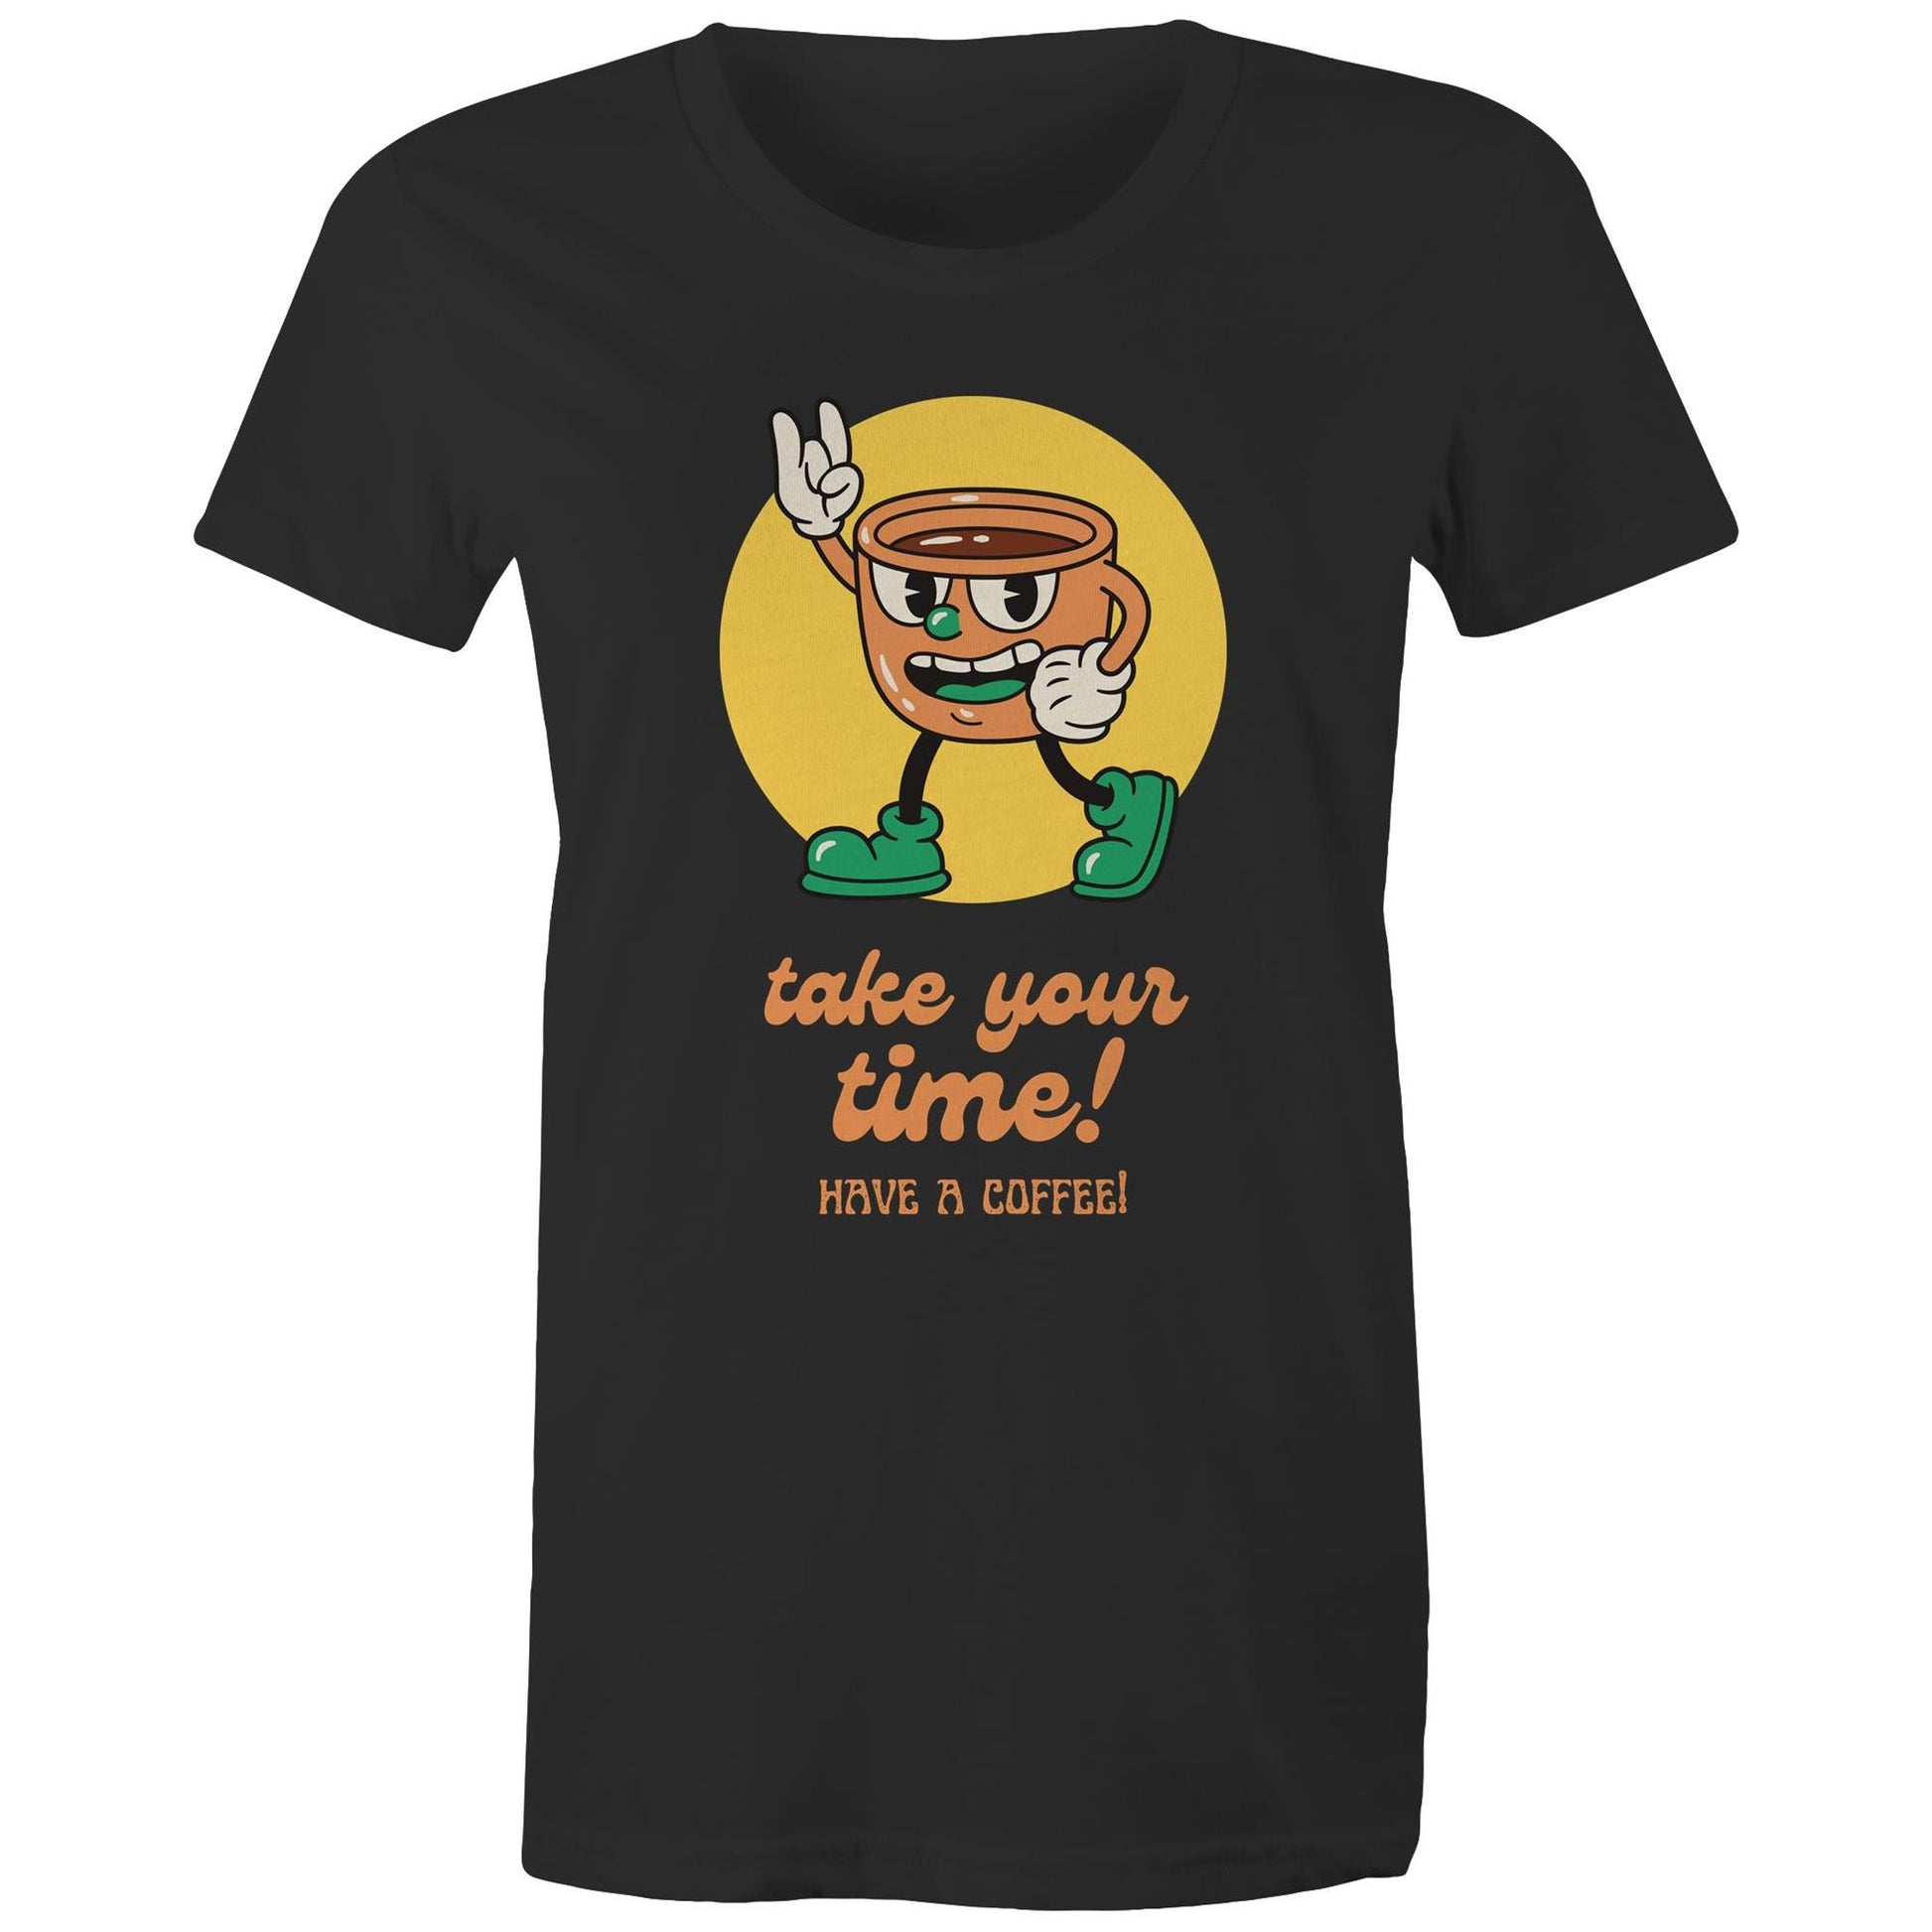 Take Your Time, Have A Coffee - Womens T-shirt Black Womens T-shirt Coffee